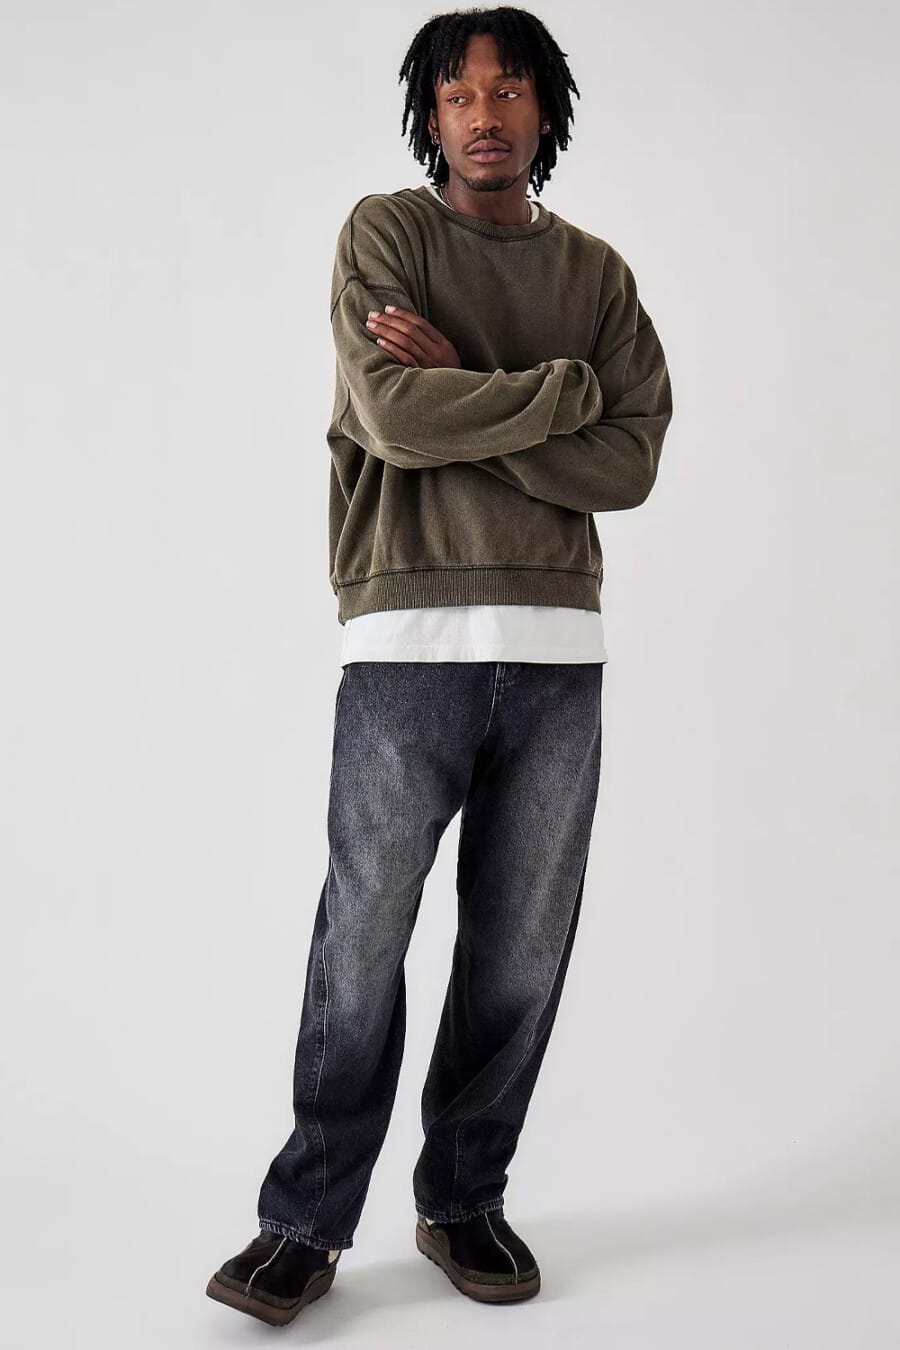 Men's faded black baggy jeans, longline white T-shirt, washed moss green sweatshirt and brown suede moccasins grunge outfit